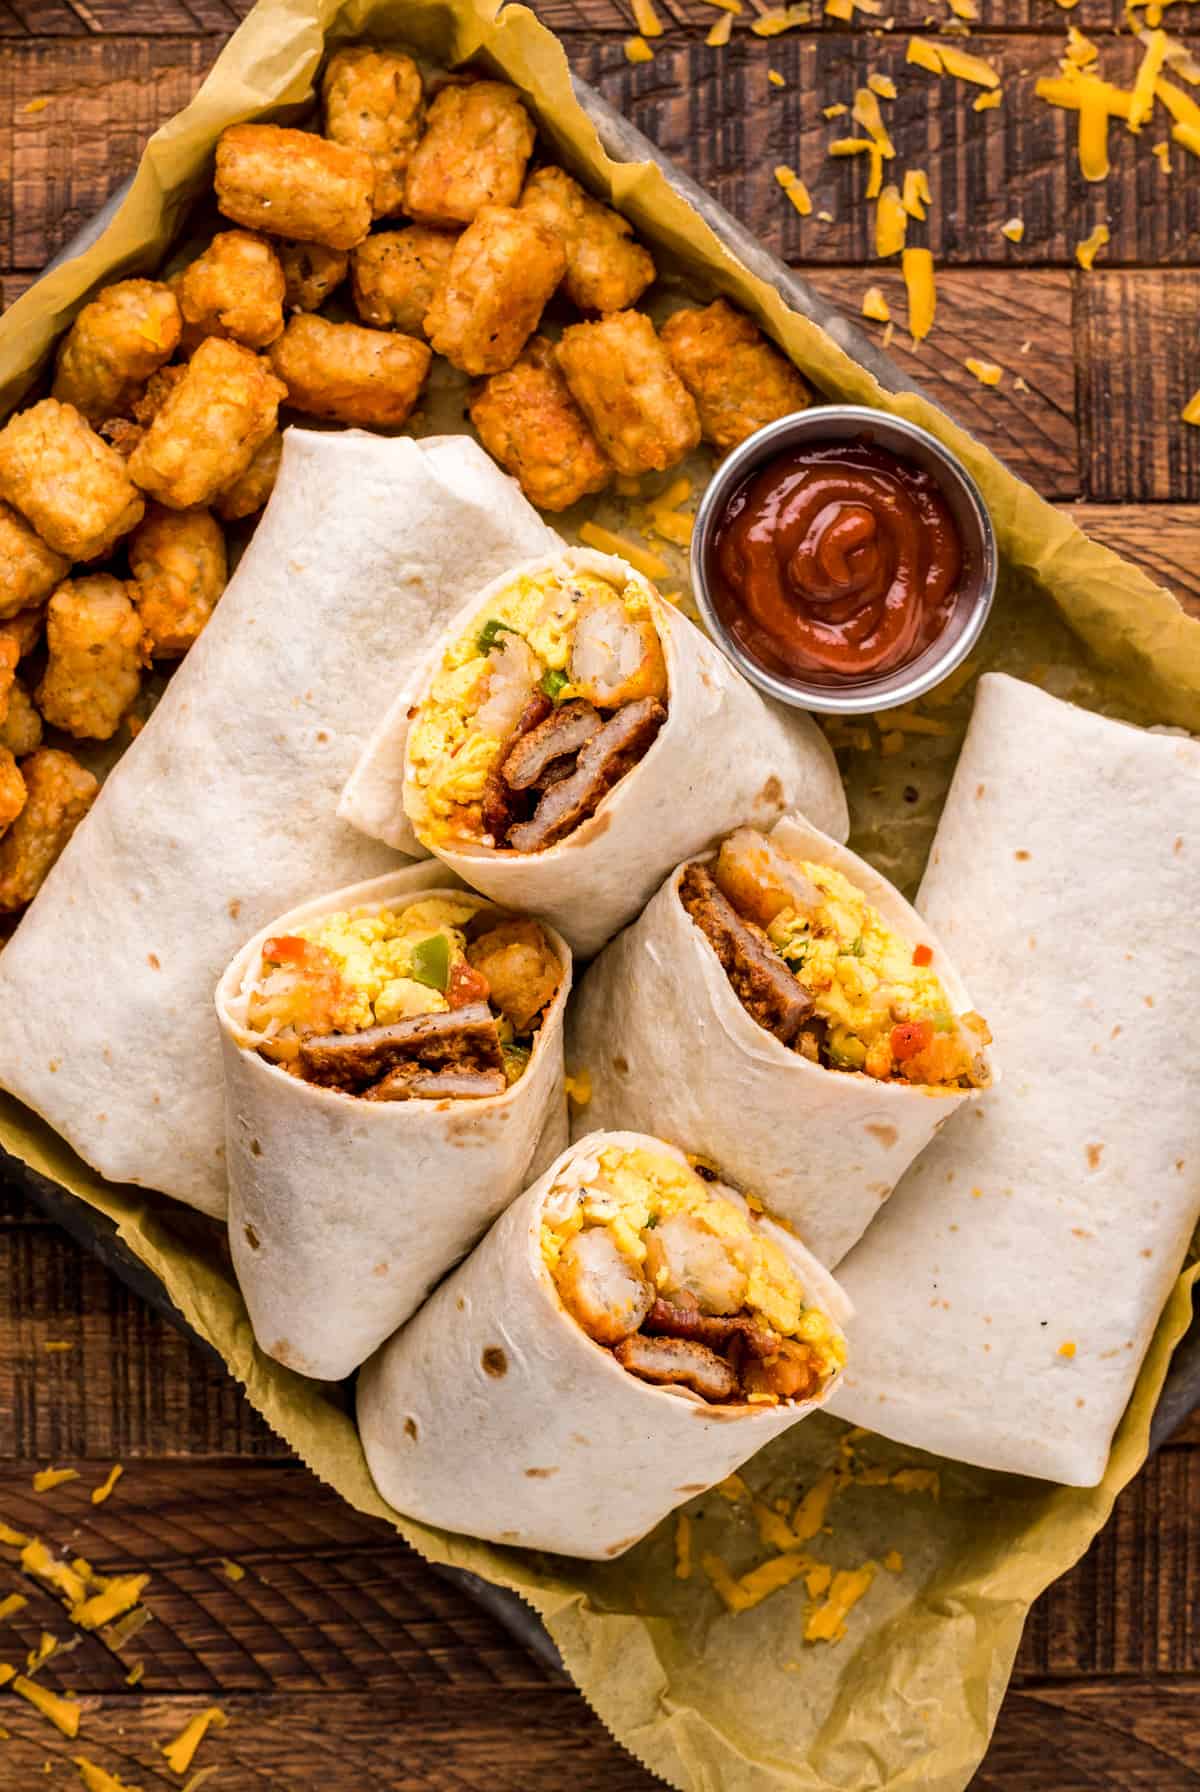 Overhead of burritos on pan cut in half and stacked with picante sauce and tater tots.